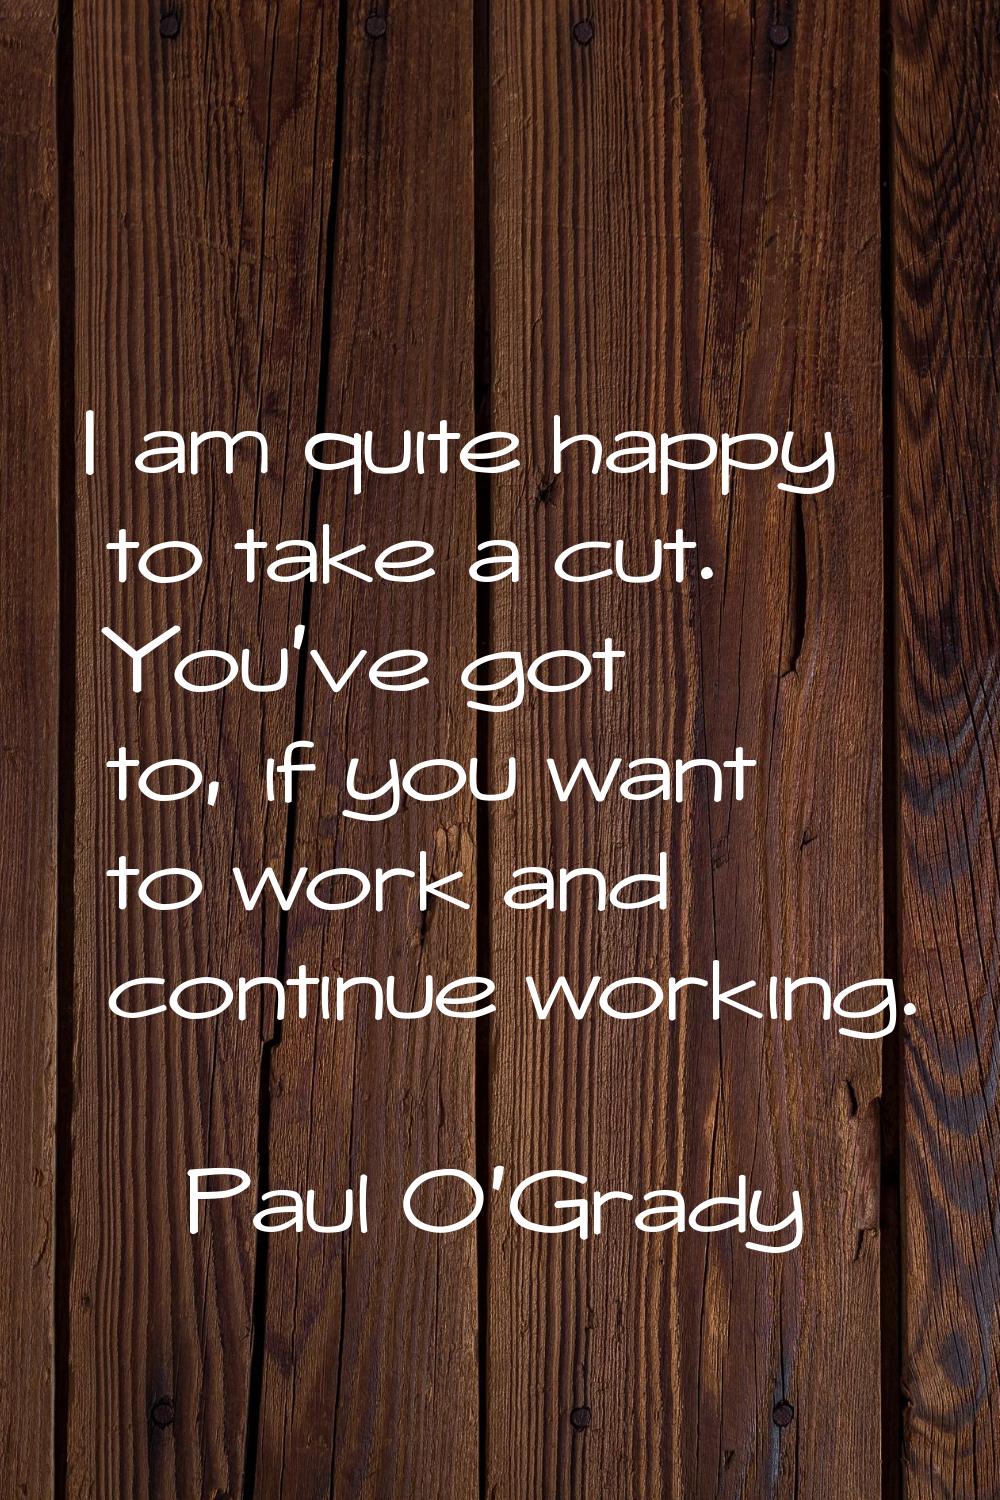 I am quite happy to take a cut. You've got to, if you want to work and continue working.